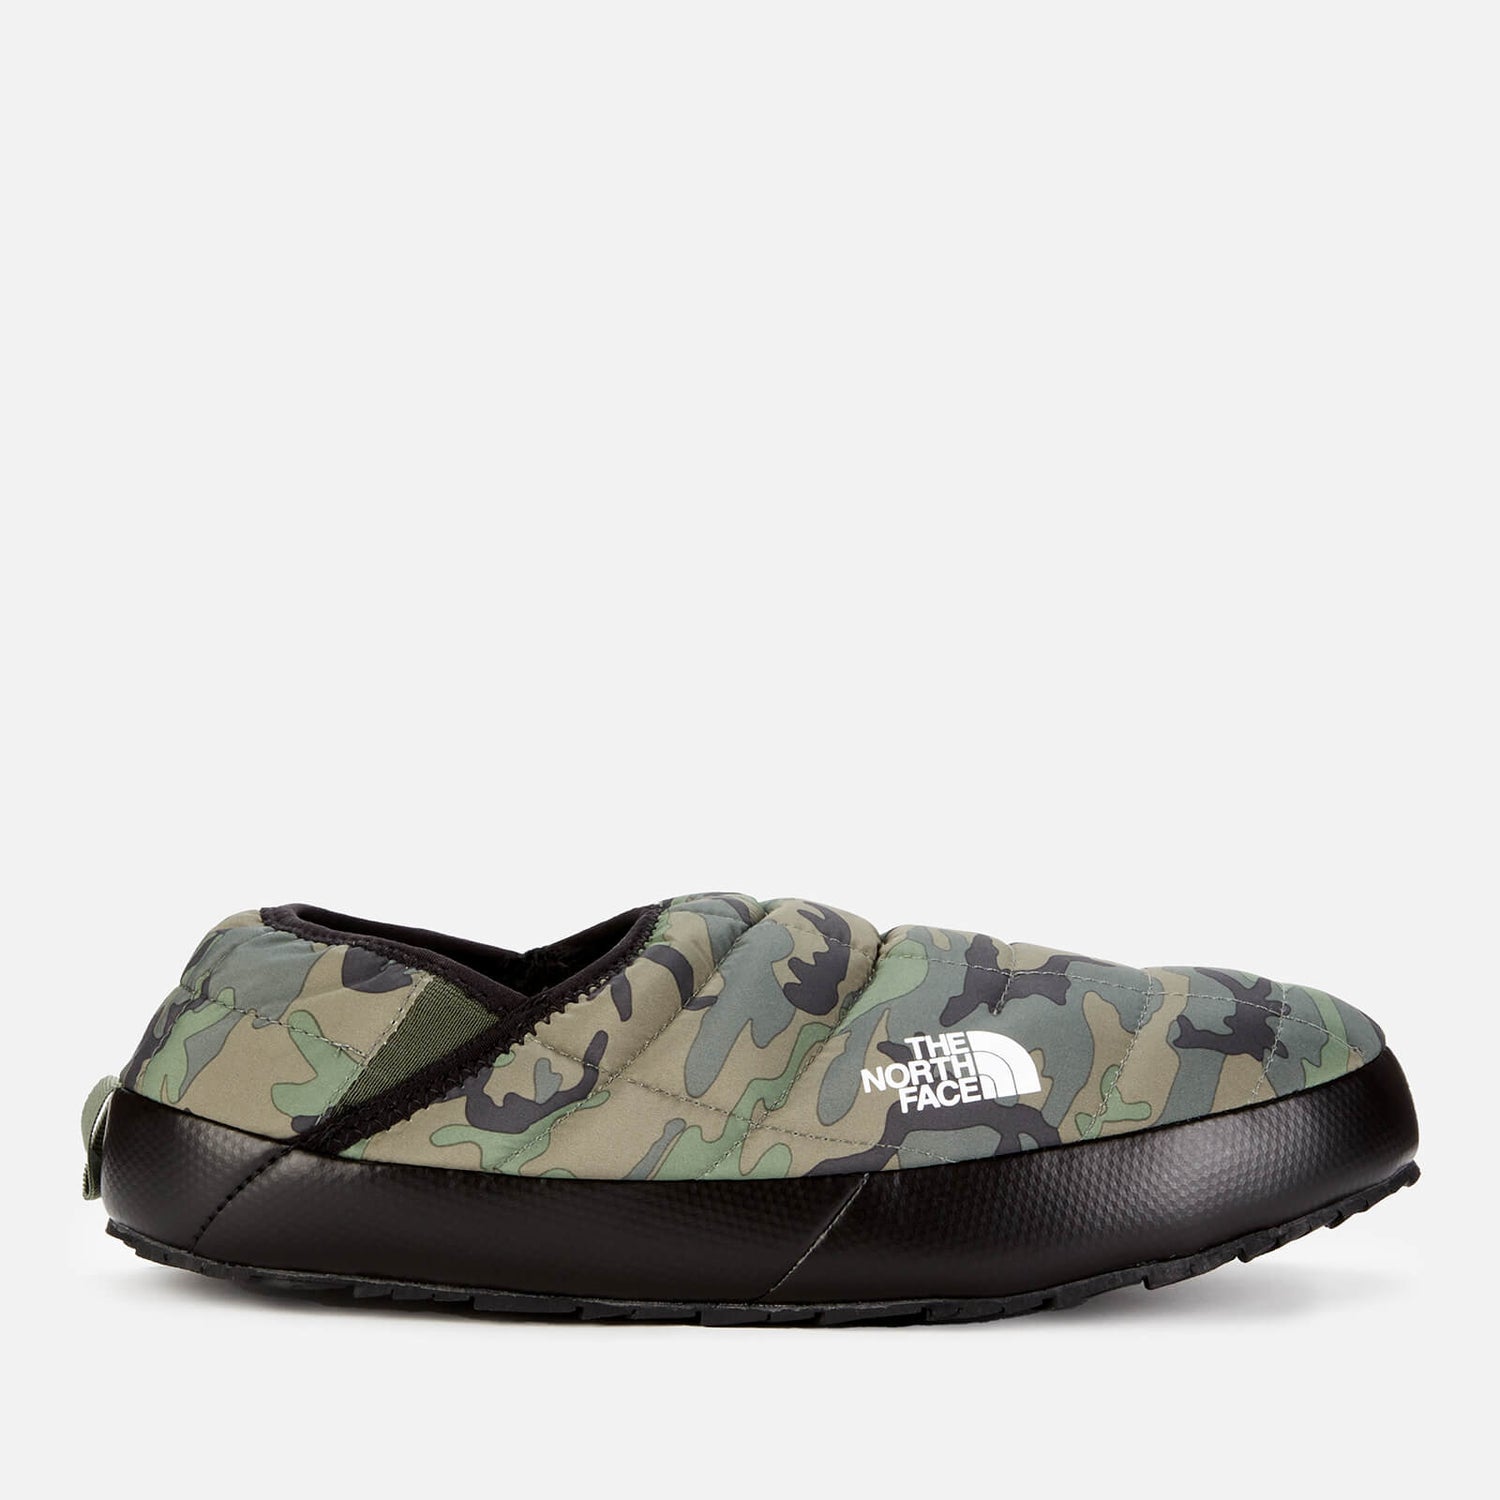 The North Face Thermoball Traction Mule V - Camo